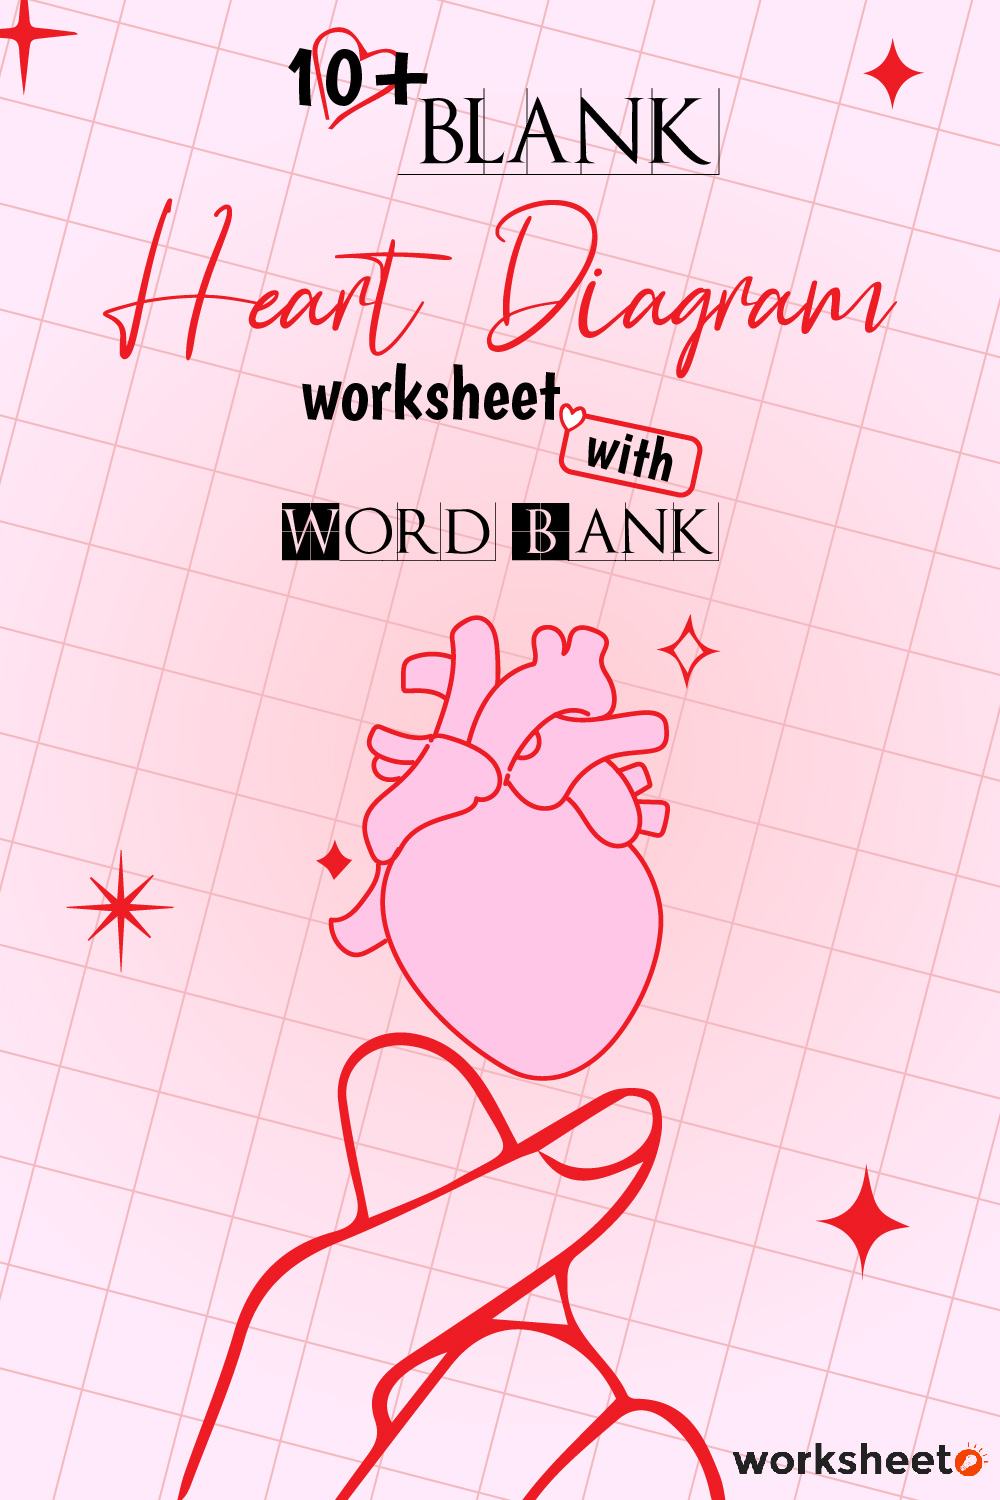 12 Images of Blank Heart Diagram Worksheet With Word Bank